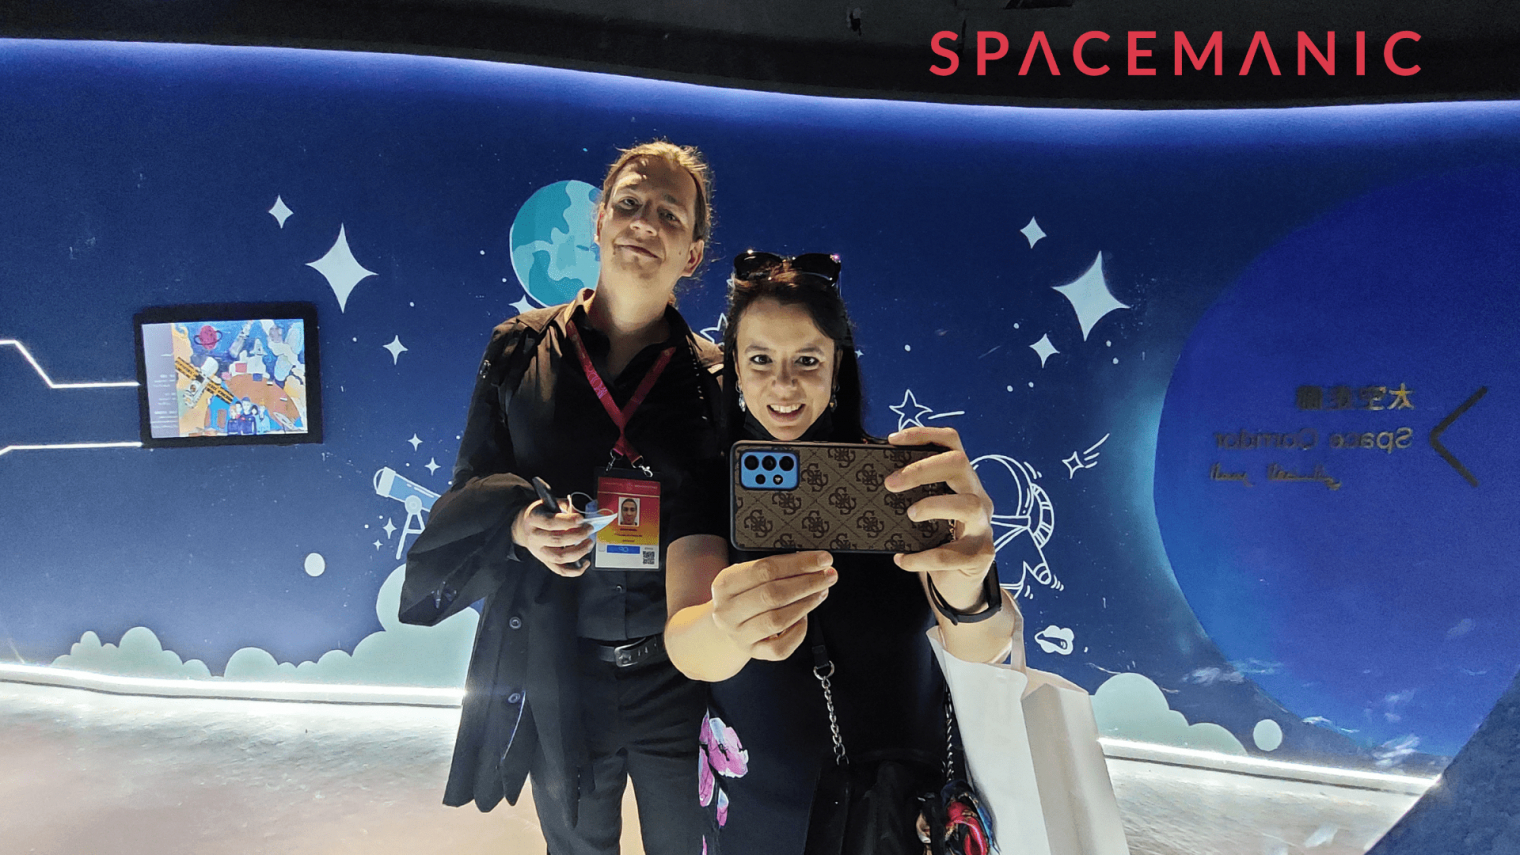 WE'RE BACK FROM OUTER SPACE: Thank you DUBAI EXPO 2020!